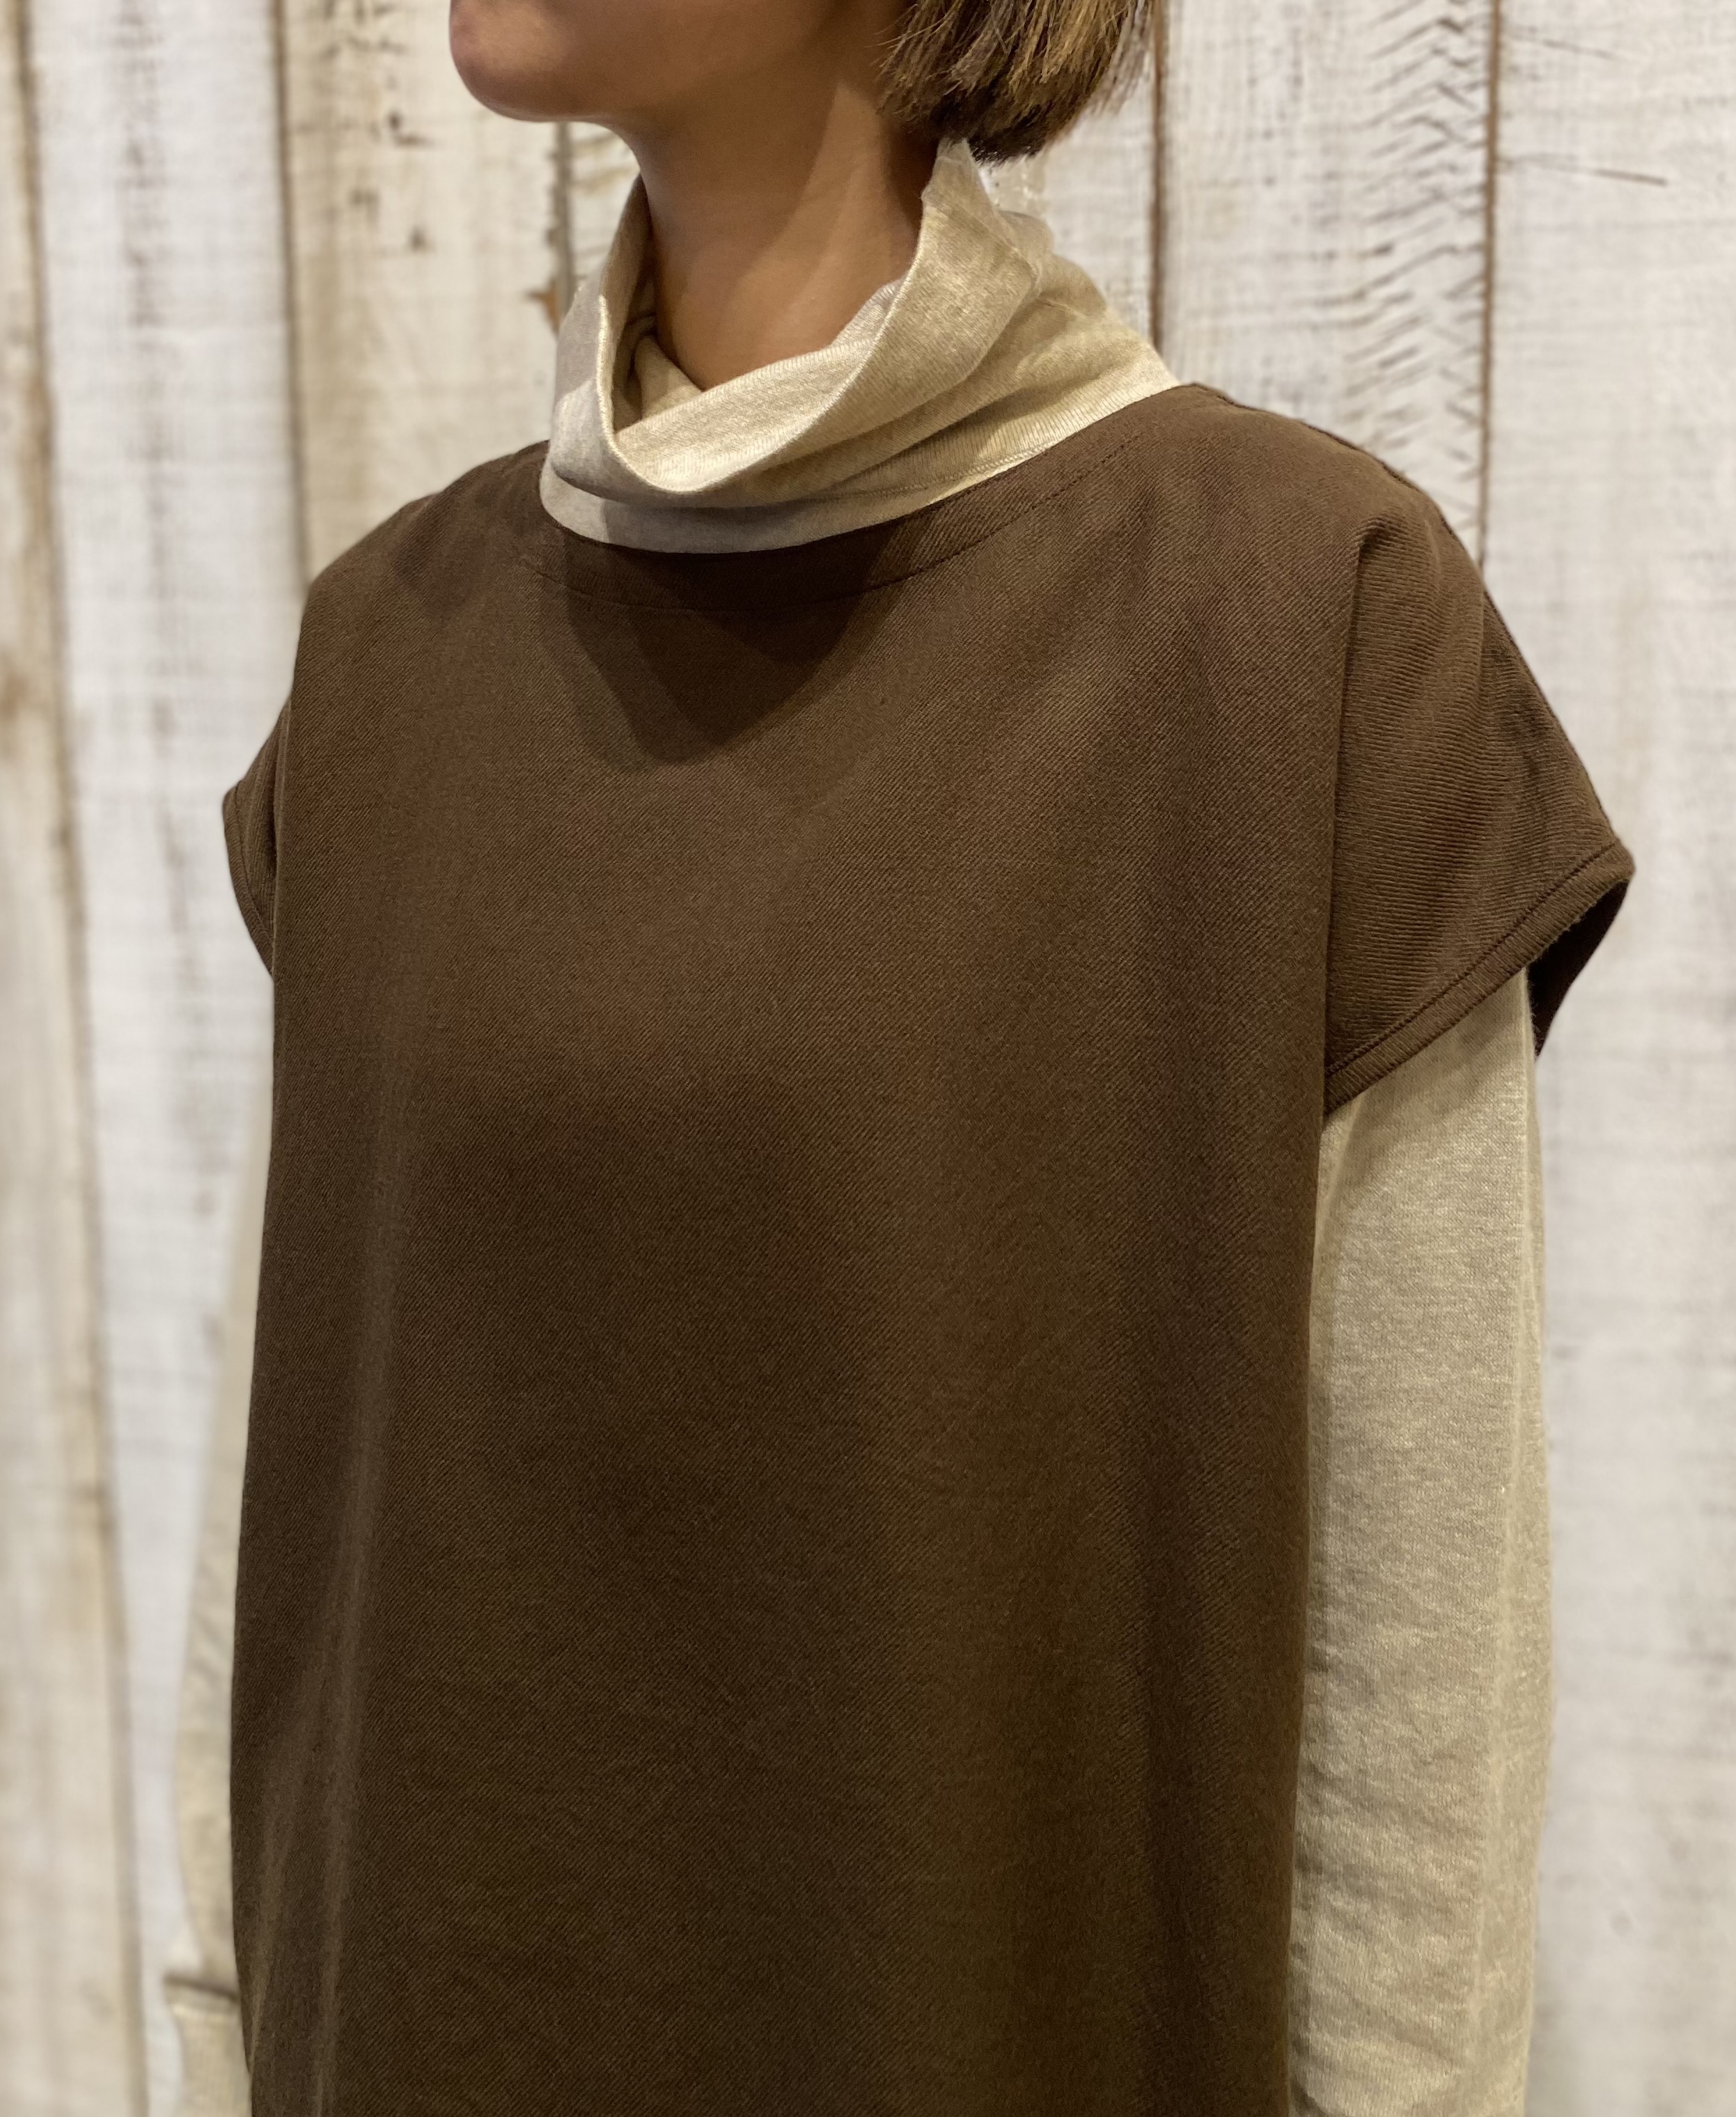 INSL23732 (ブラウス) COTTON WOOL TWILL WEAVE PLAIN FRENCH/SL BACK SIDE PLEATS PULLOVER